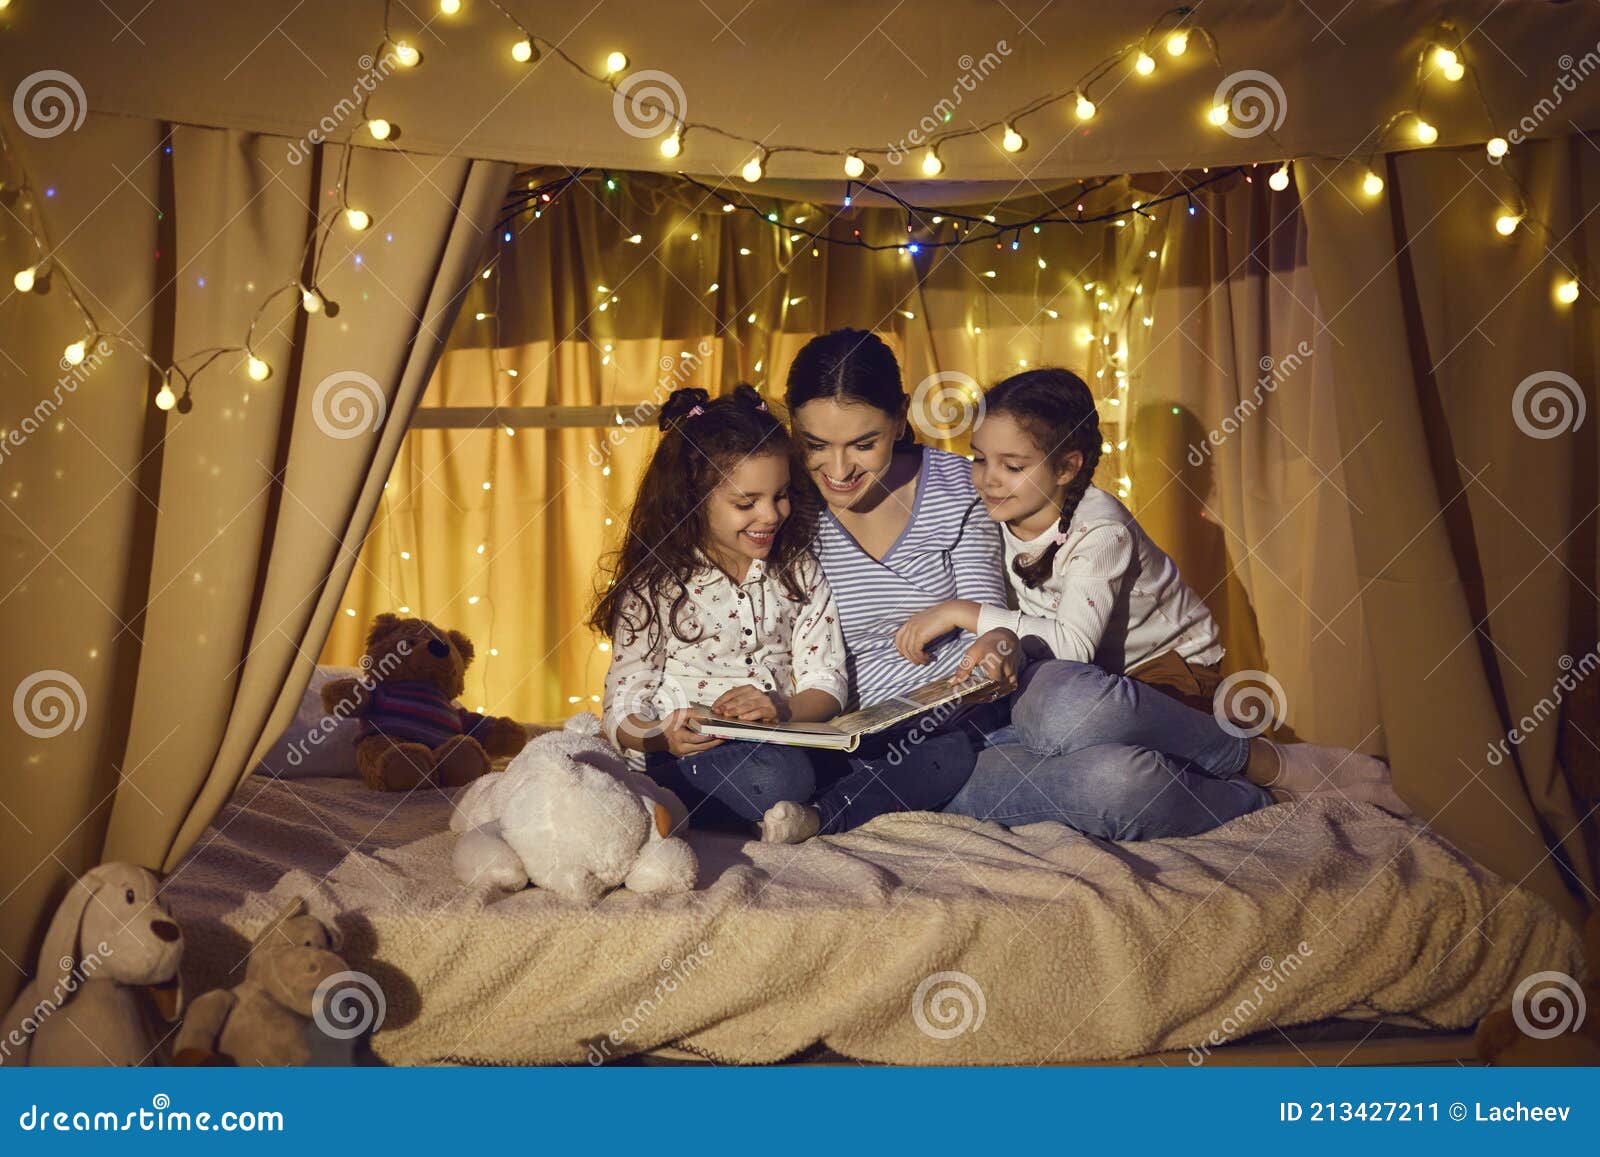 happy mother and children sitting in playroom tent and reading book of fairy tales